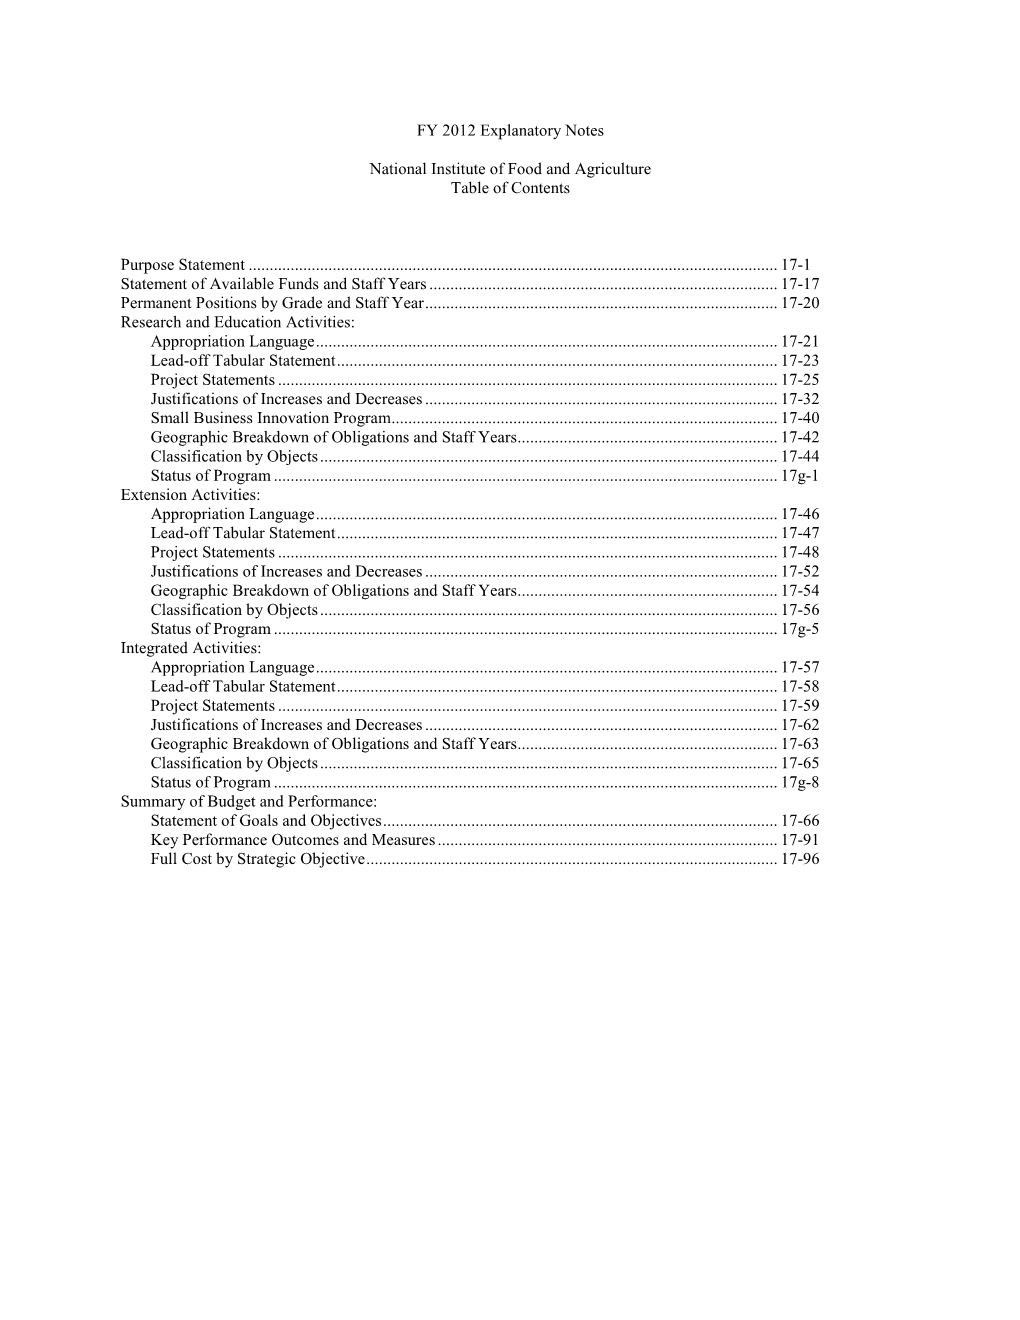 National Institute of Food and Agriculture Table of Contents